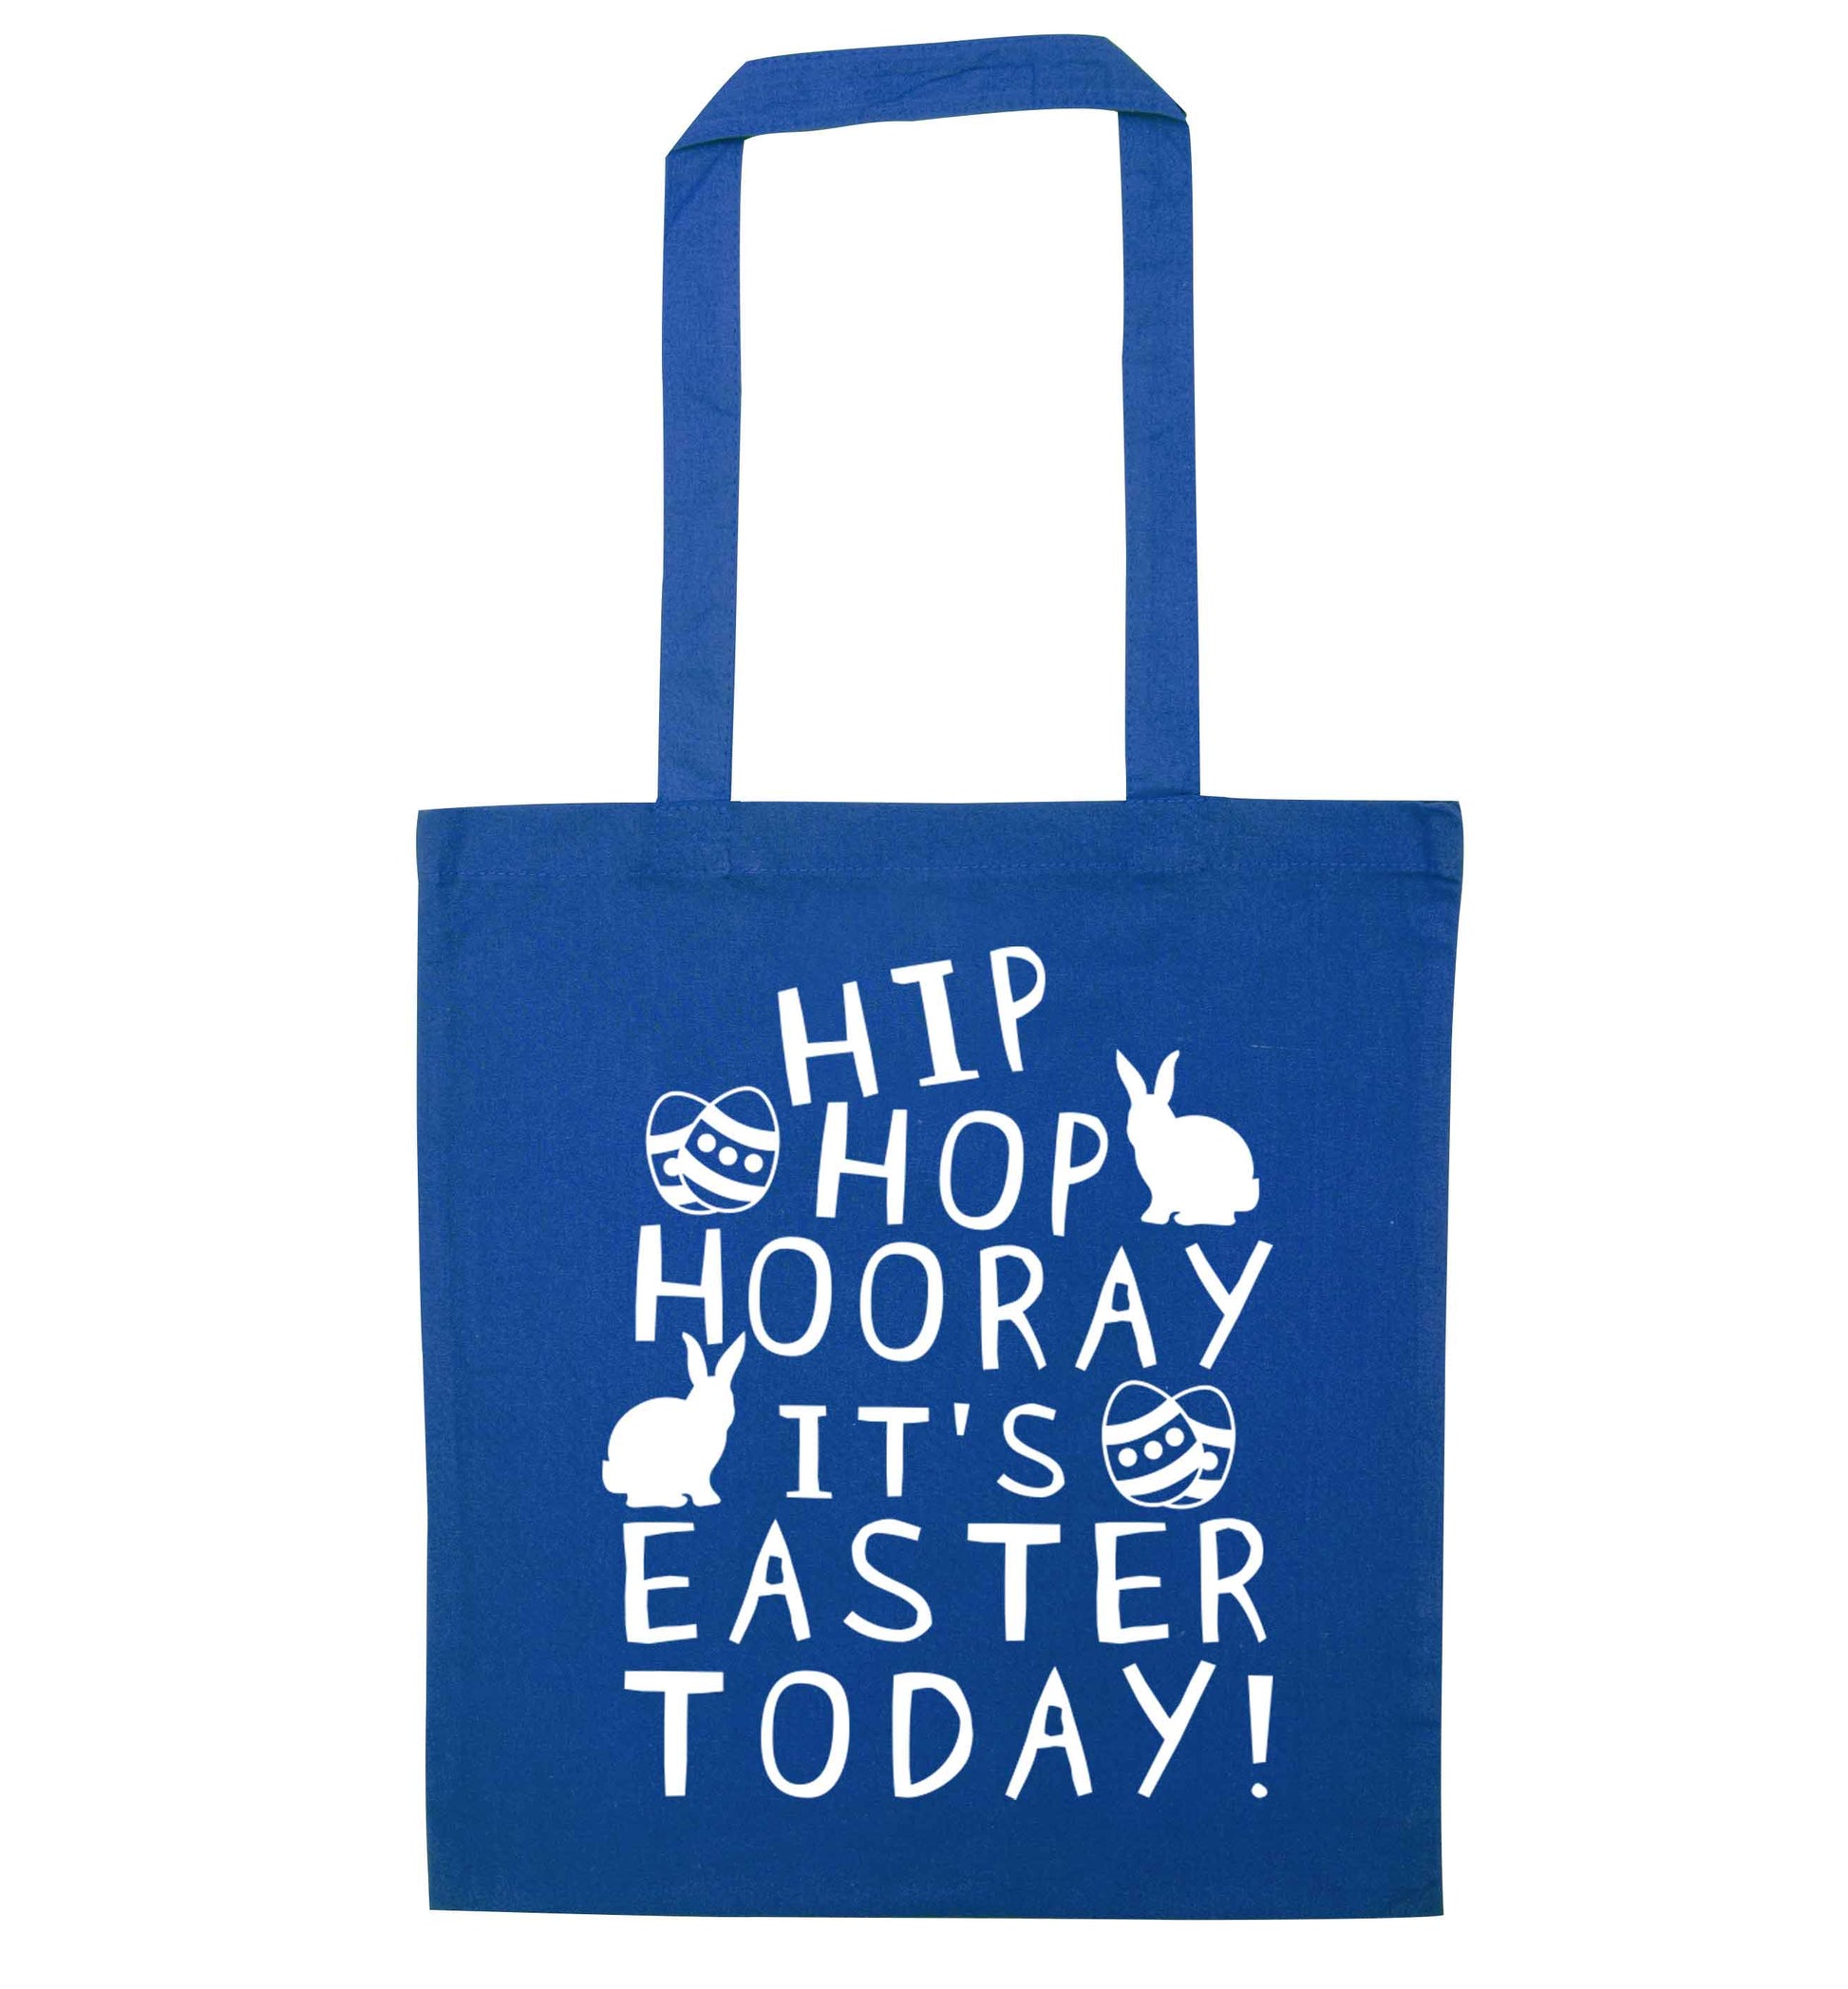 Hip hip hooray it's Easter today! blue tote bag